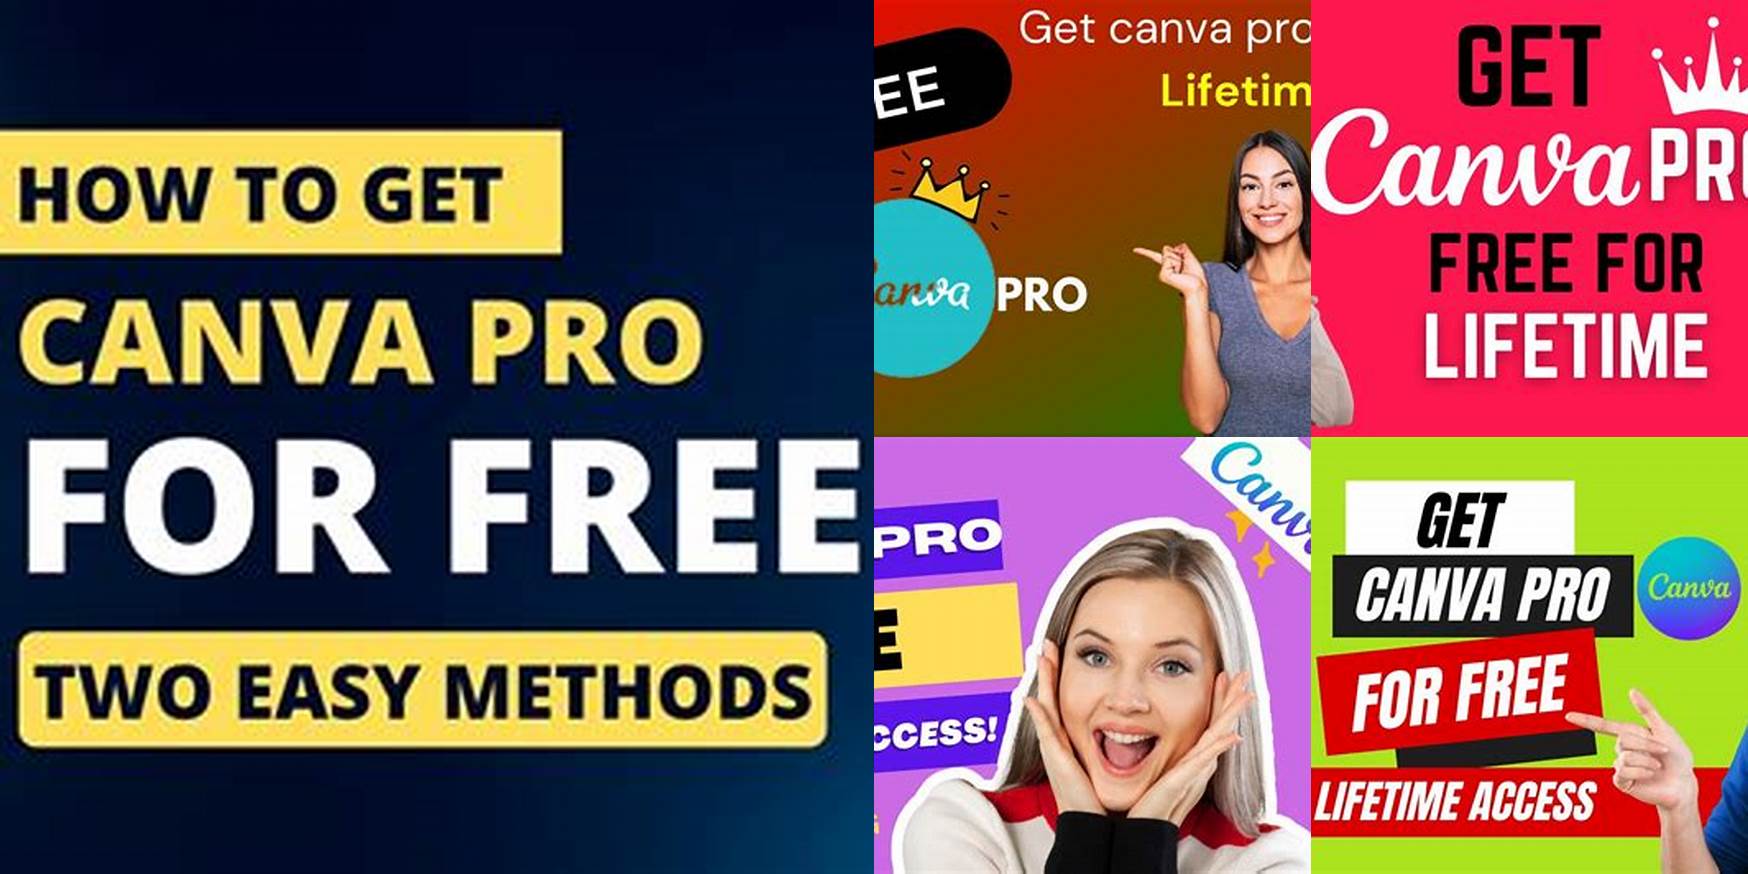 How To Get Canva Pro Lifetime Free